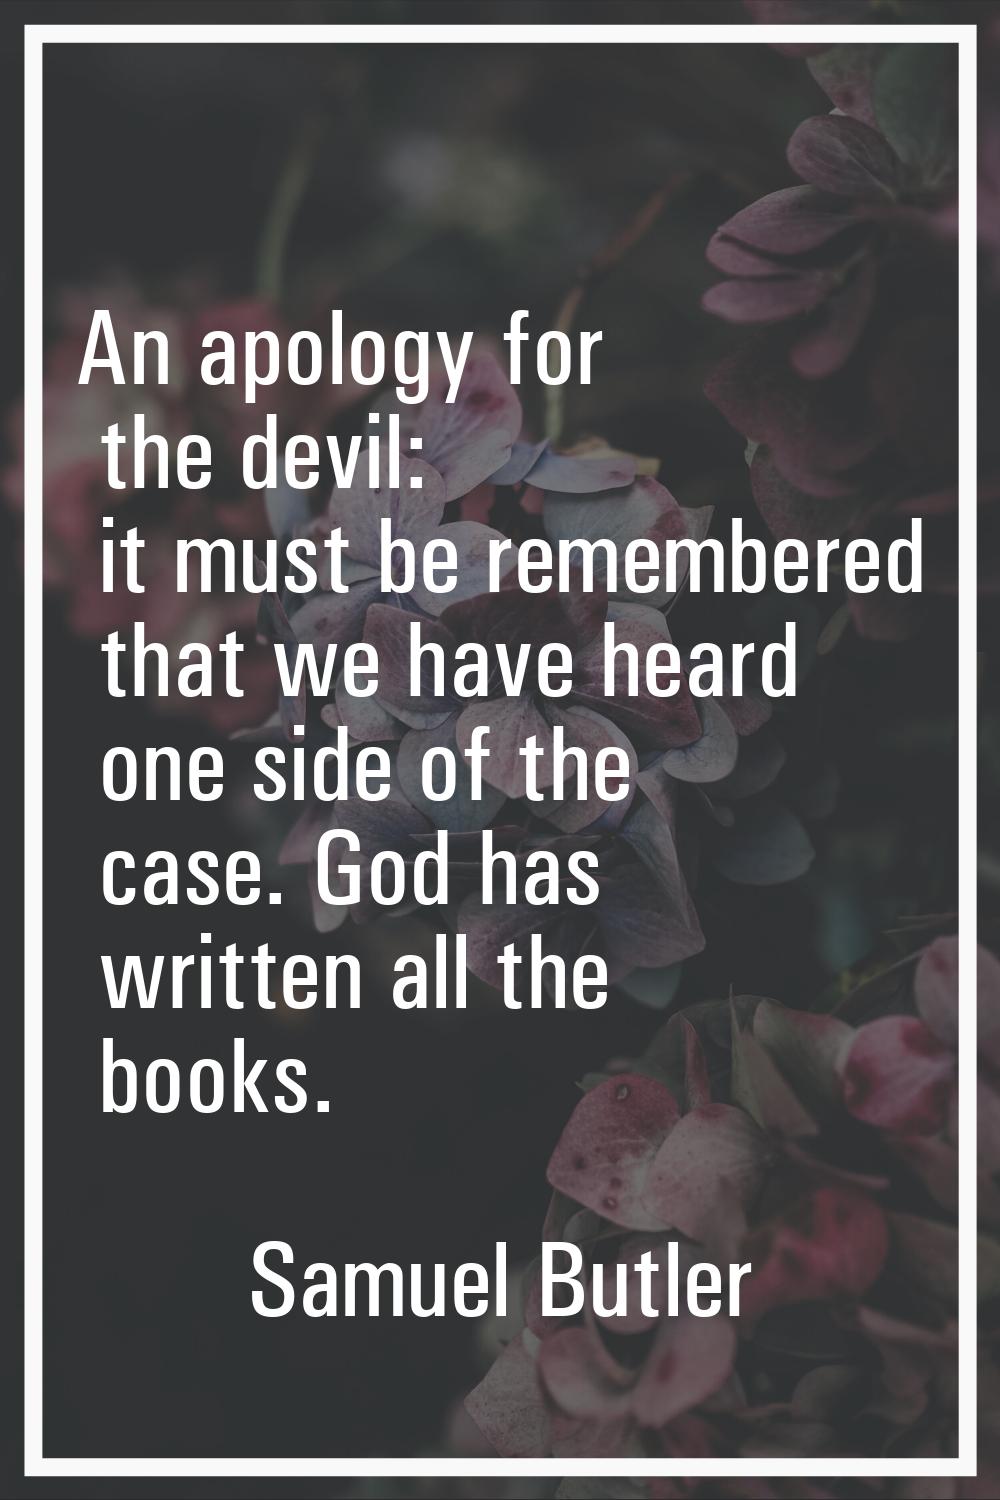 An apology for the devil: it must be remembered that we have heard one side of the case. God has wr